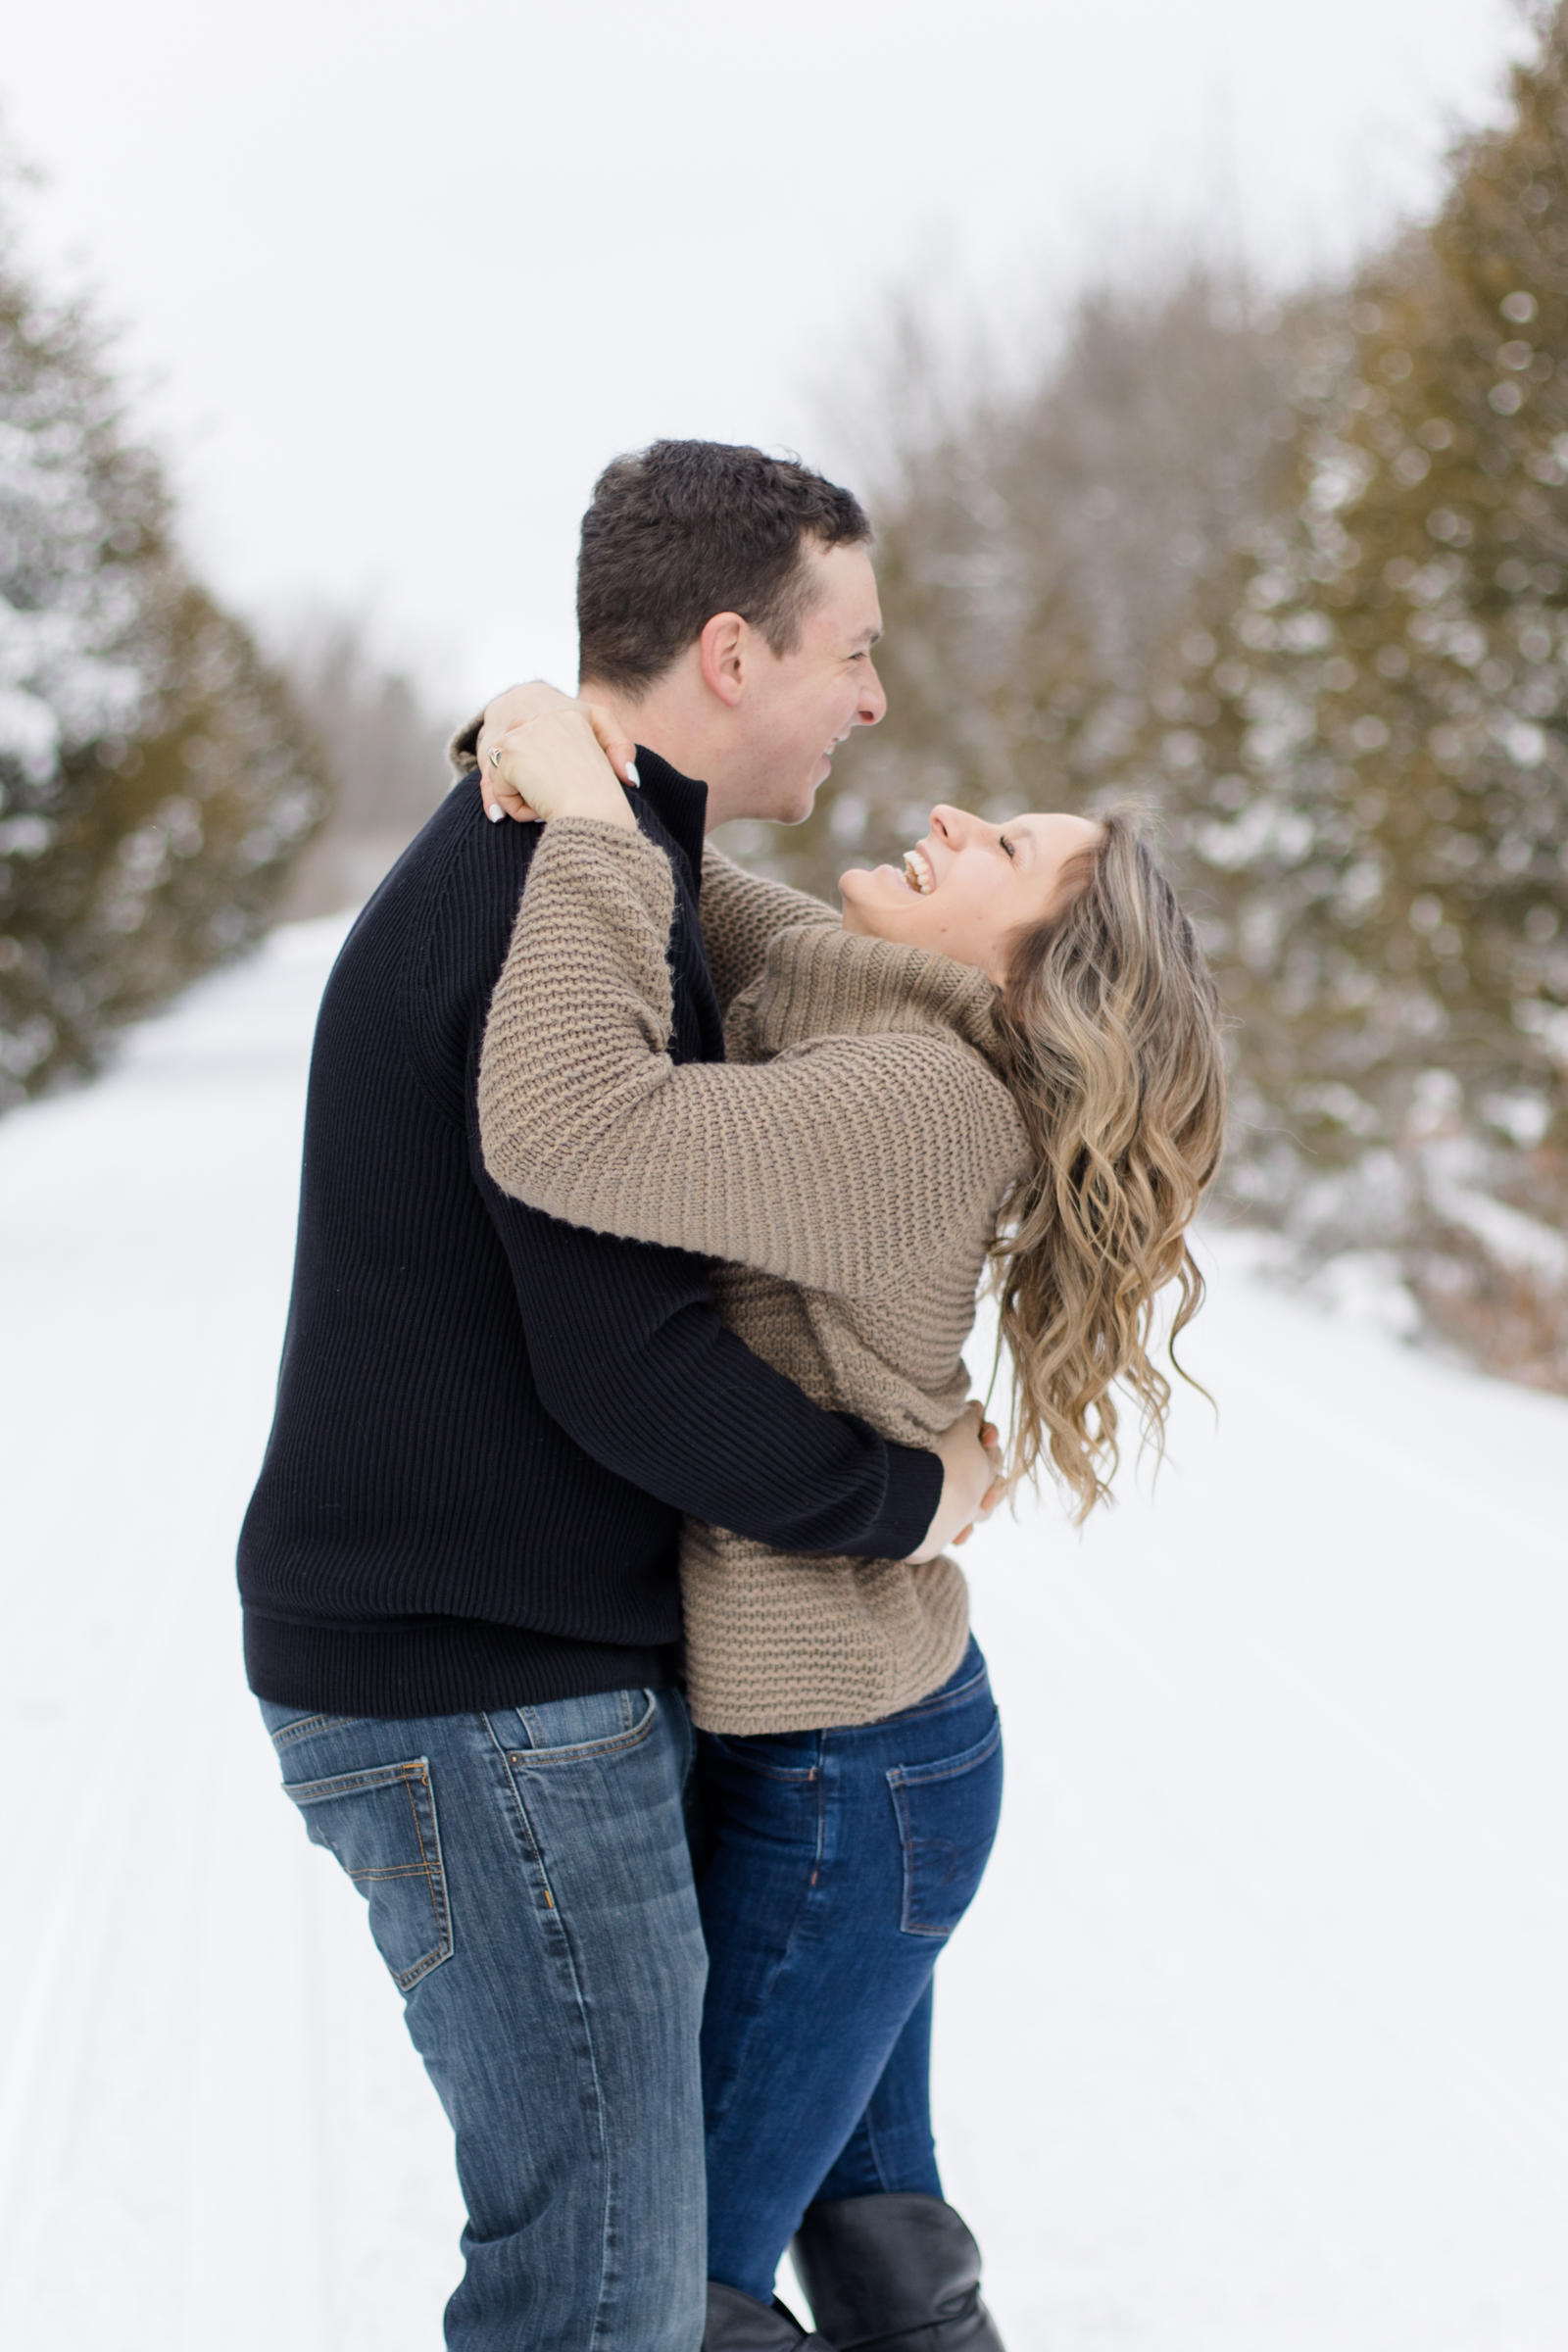 A snowy winter engagement session in carleton place ontario. Photographed by Ottawa Engagement Photographer, Brittany Navin Photography